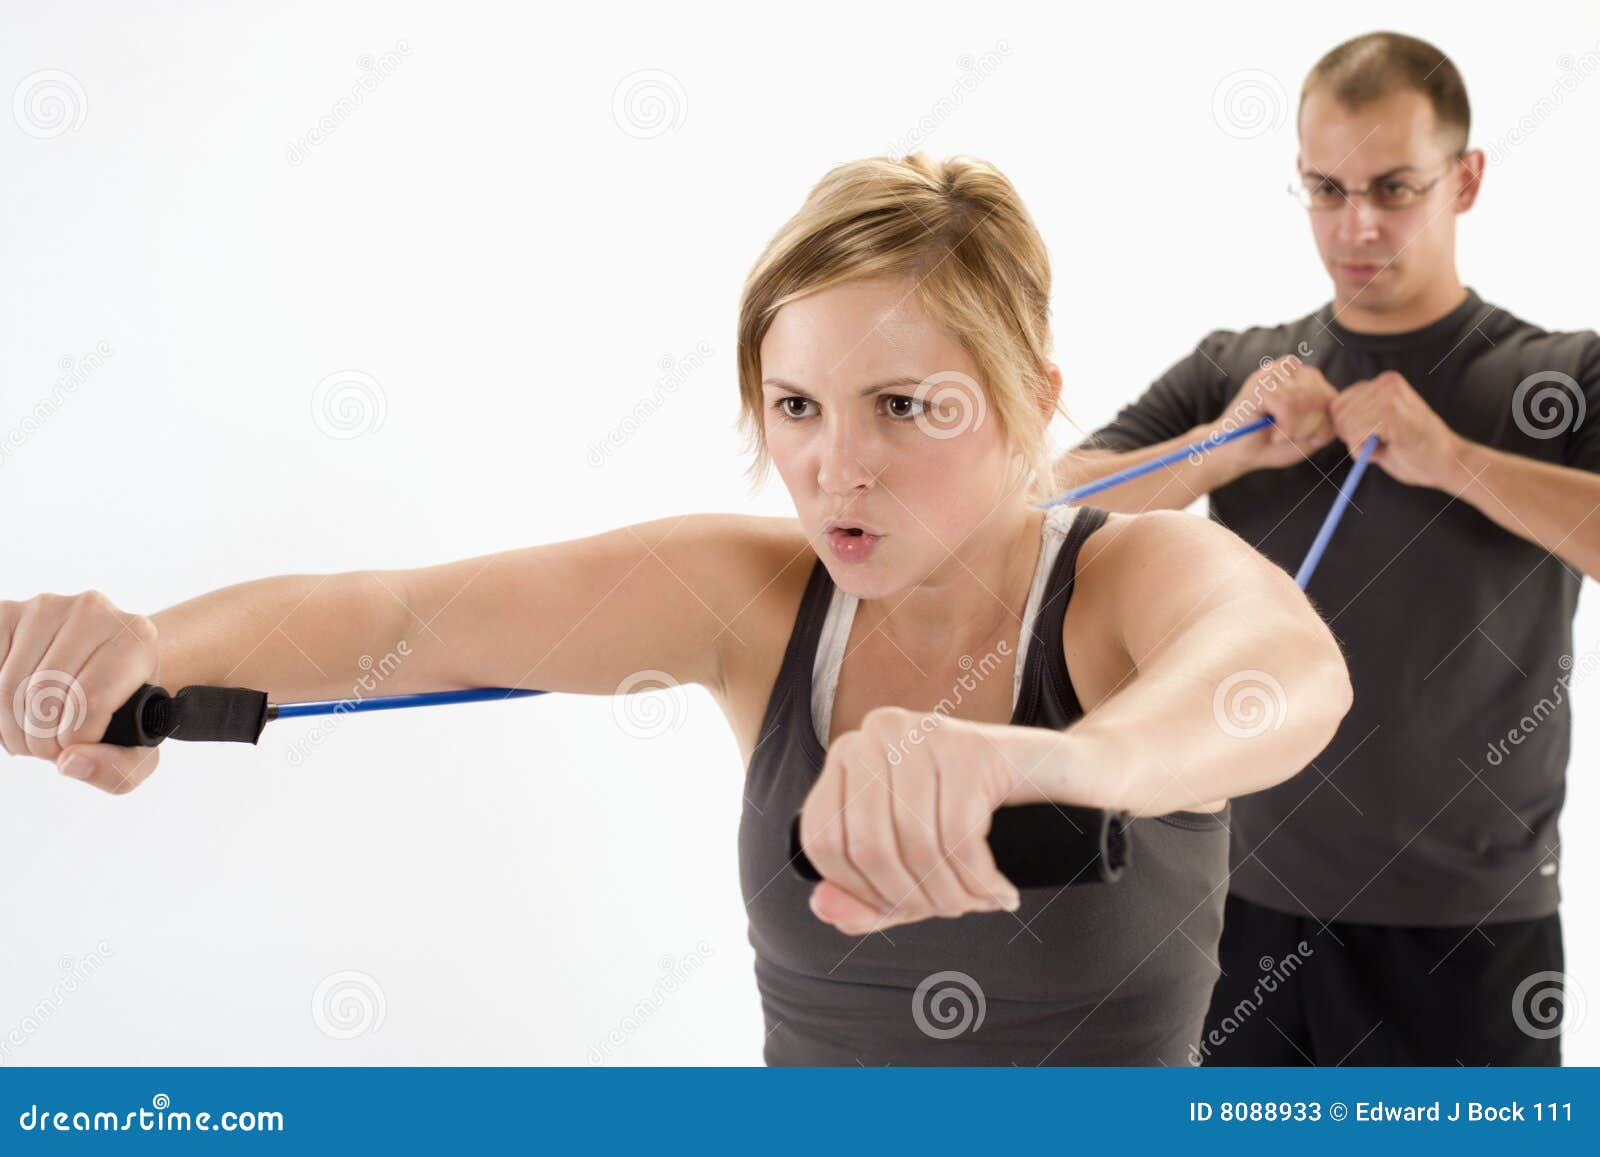 woman exercising with personal trainer